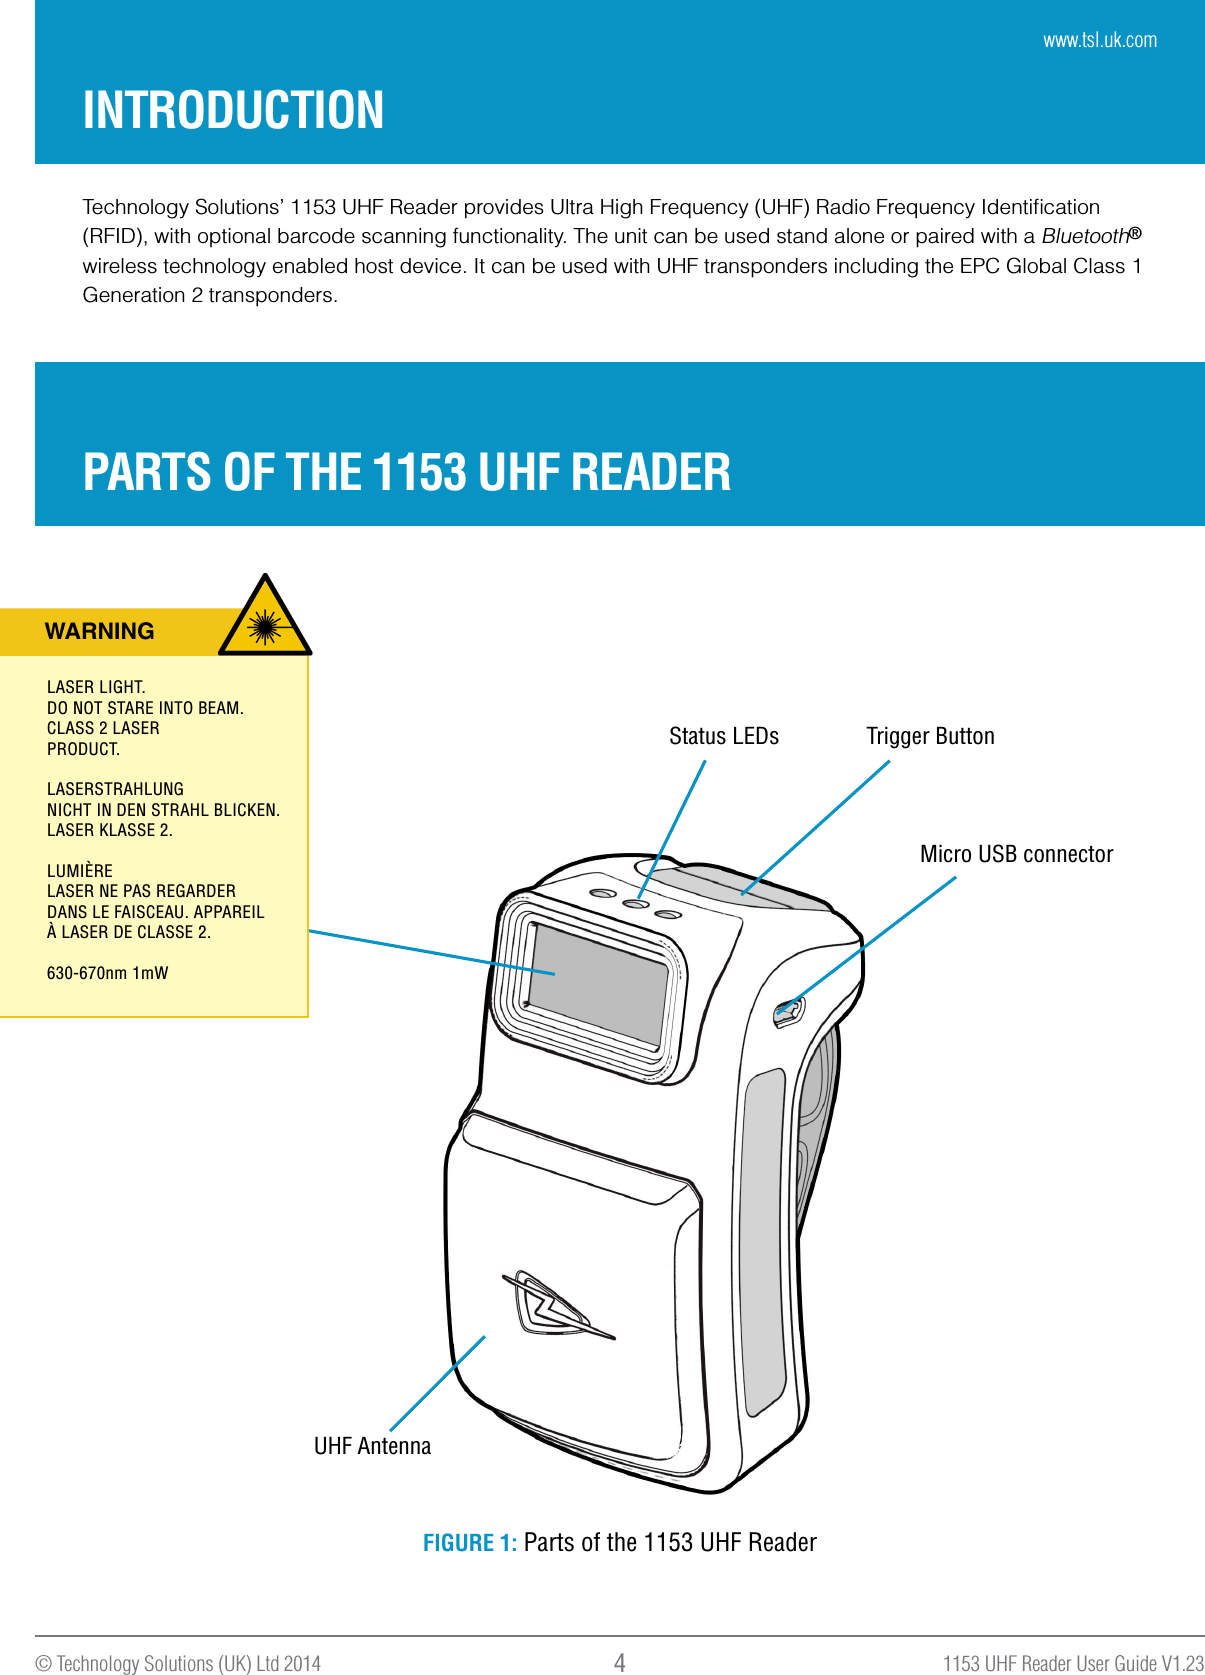 1153 UHF Reader User Guide V1.23© Technology Solutions (UK) Ltd 2014 4Technology Solutions’ 1153 UHF Reader provides Ultra High Frequency (UHF) Radio Frequency Identiﬁcation (RFID), with optional barcode scanning functionality. The unit can be used stand alone or paired with a Bluetooth® wireless technology enabled host device. It can be used with UHF transponders including the EPC Global Class 1 Generation 2 transponders.INTRODUCTIONPARTS OF THE 1153 UHF READERMicro USB connectorStatus LEDs Trigger ButtonUHF AntennaFIGURE 1: Parts of the 1153 UHF ReaderWARNINGLASER LIGHT. DO NOT STARE INTO BEAM.CLASS 2 LASERPRODUCT.LASERSTRAHLUNGNICHT IN DEN STRAHL BLICKEN.LASER KLASSE 2. LUMIÈRELASER NE PAS REGARDERDANS LE FAISCEAU. APPAREILÀ LASER DE CLASSE 2. 630-670nm 1mWwww.tsl.uk.com